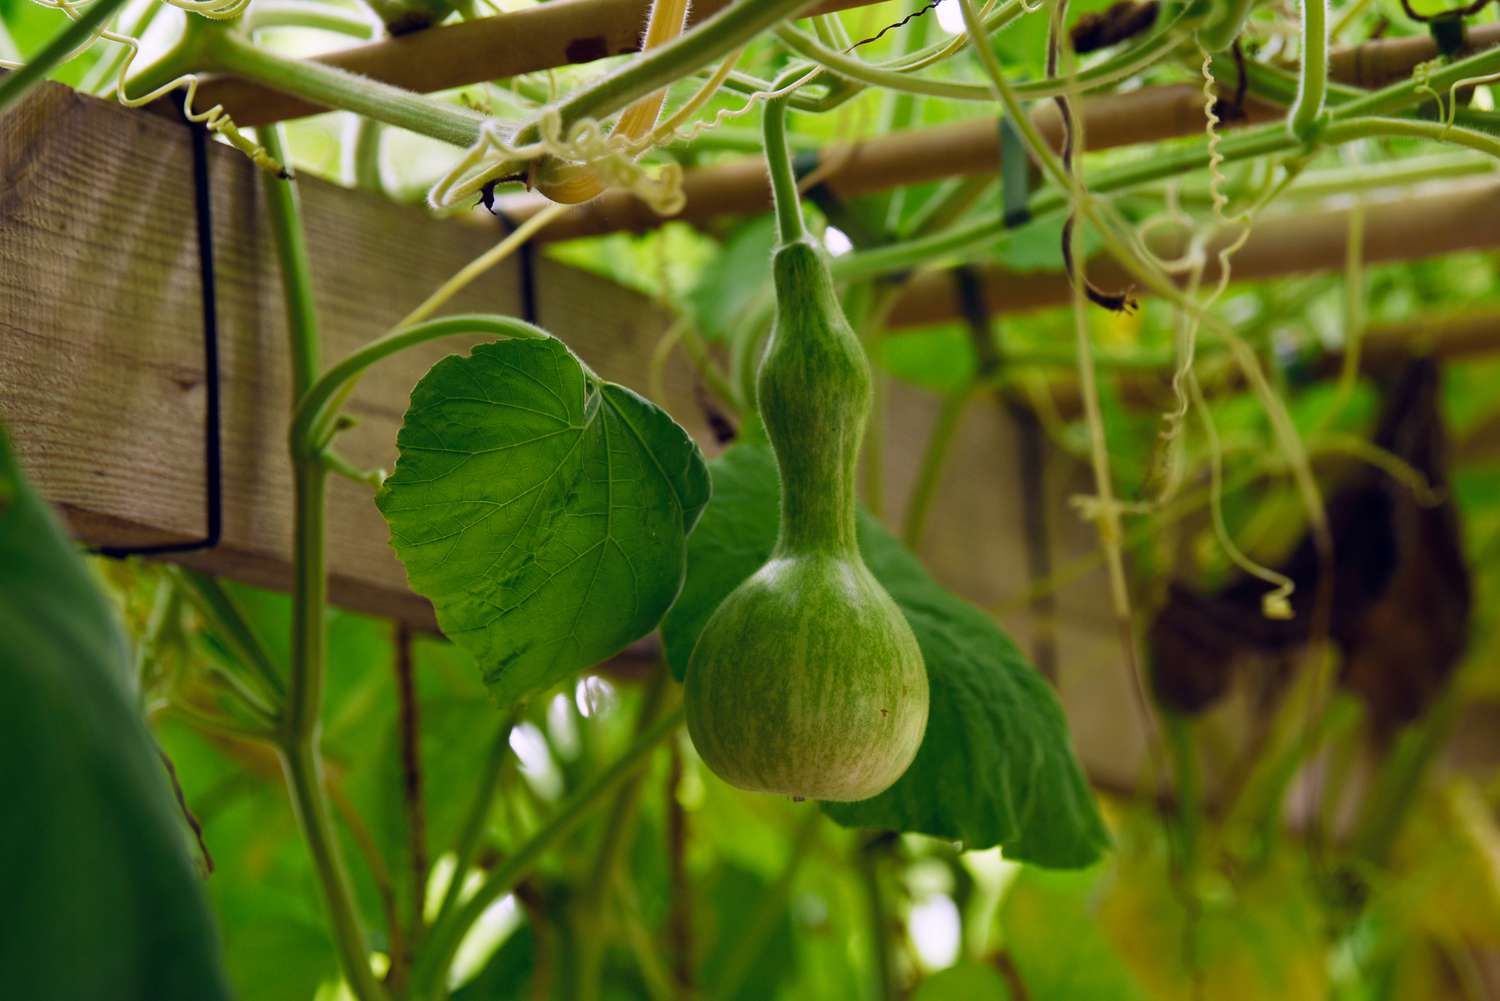 Ornamental gourd vines with green vegetable hanging from wooden arbor closeup